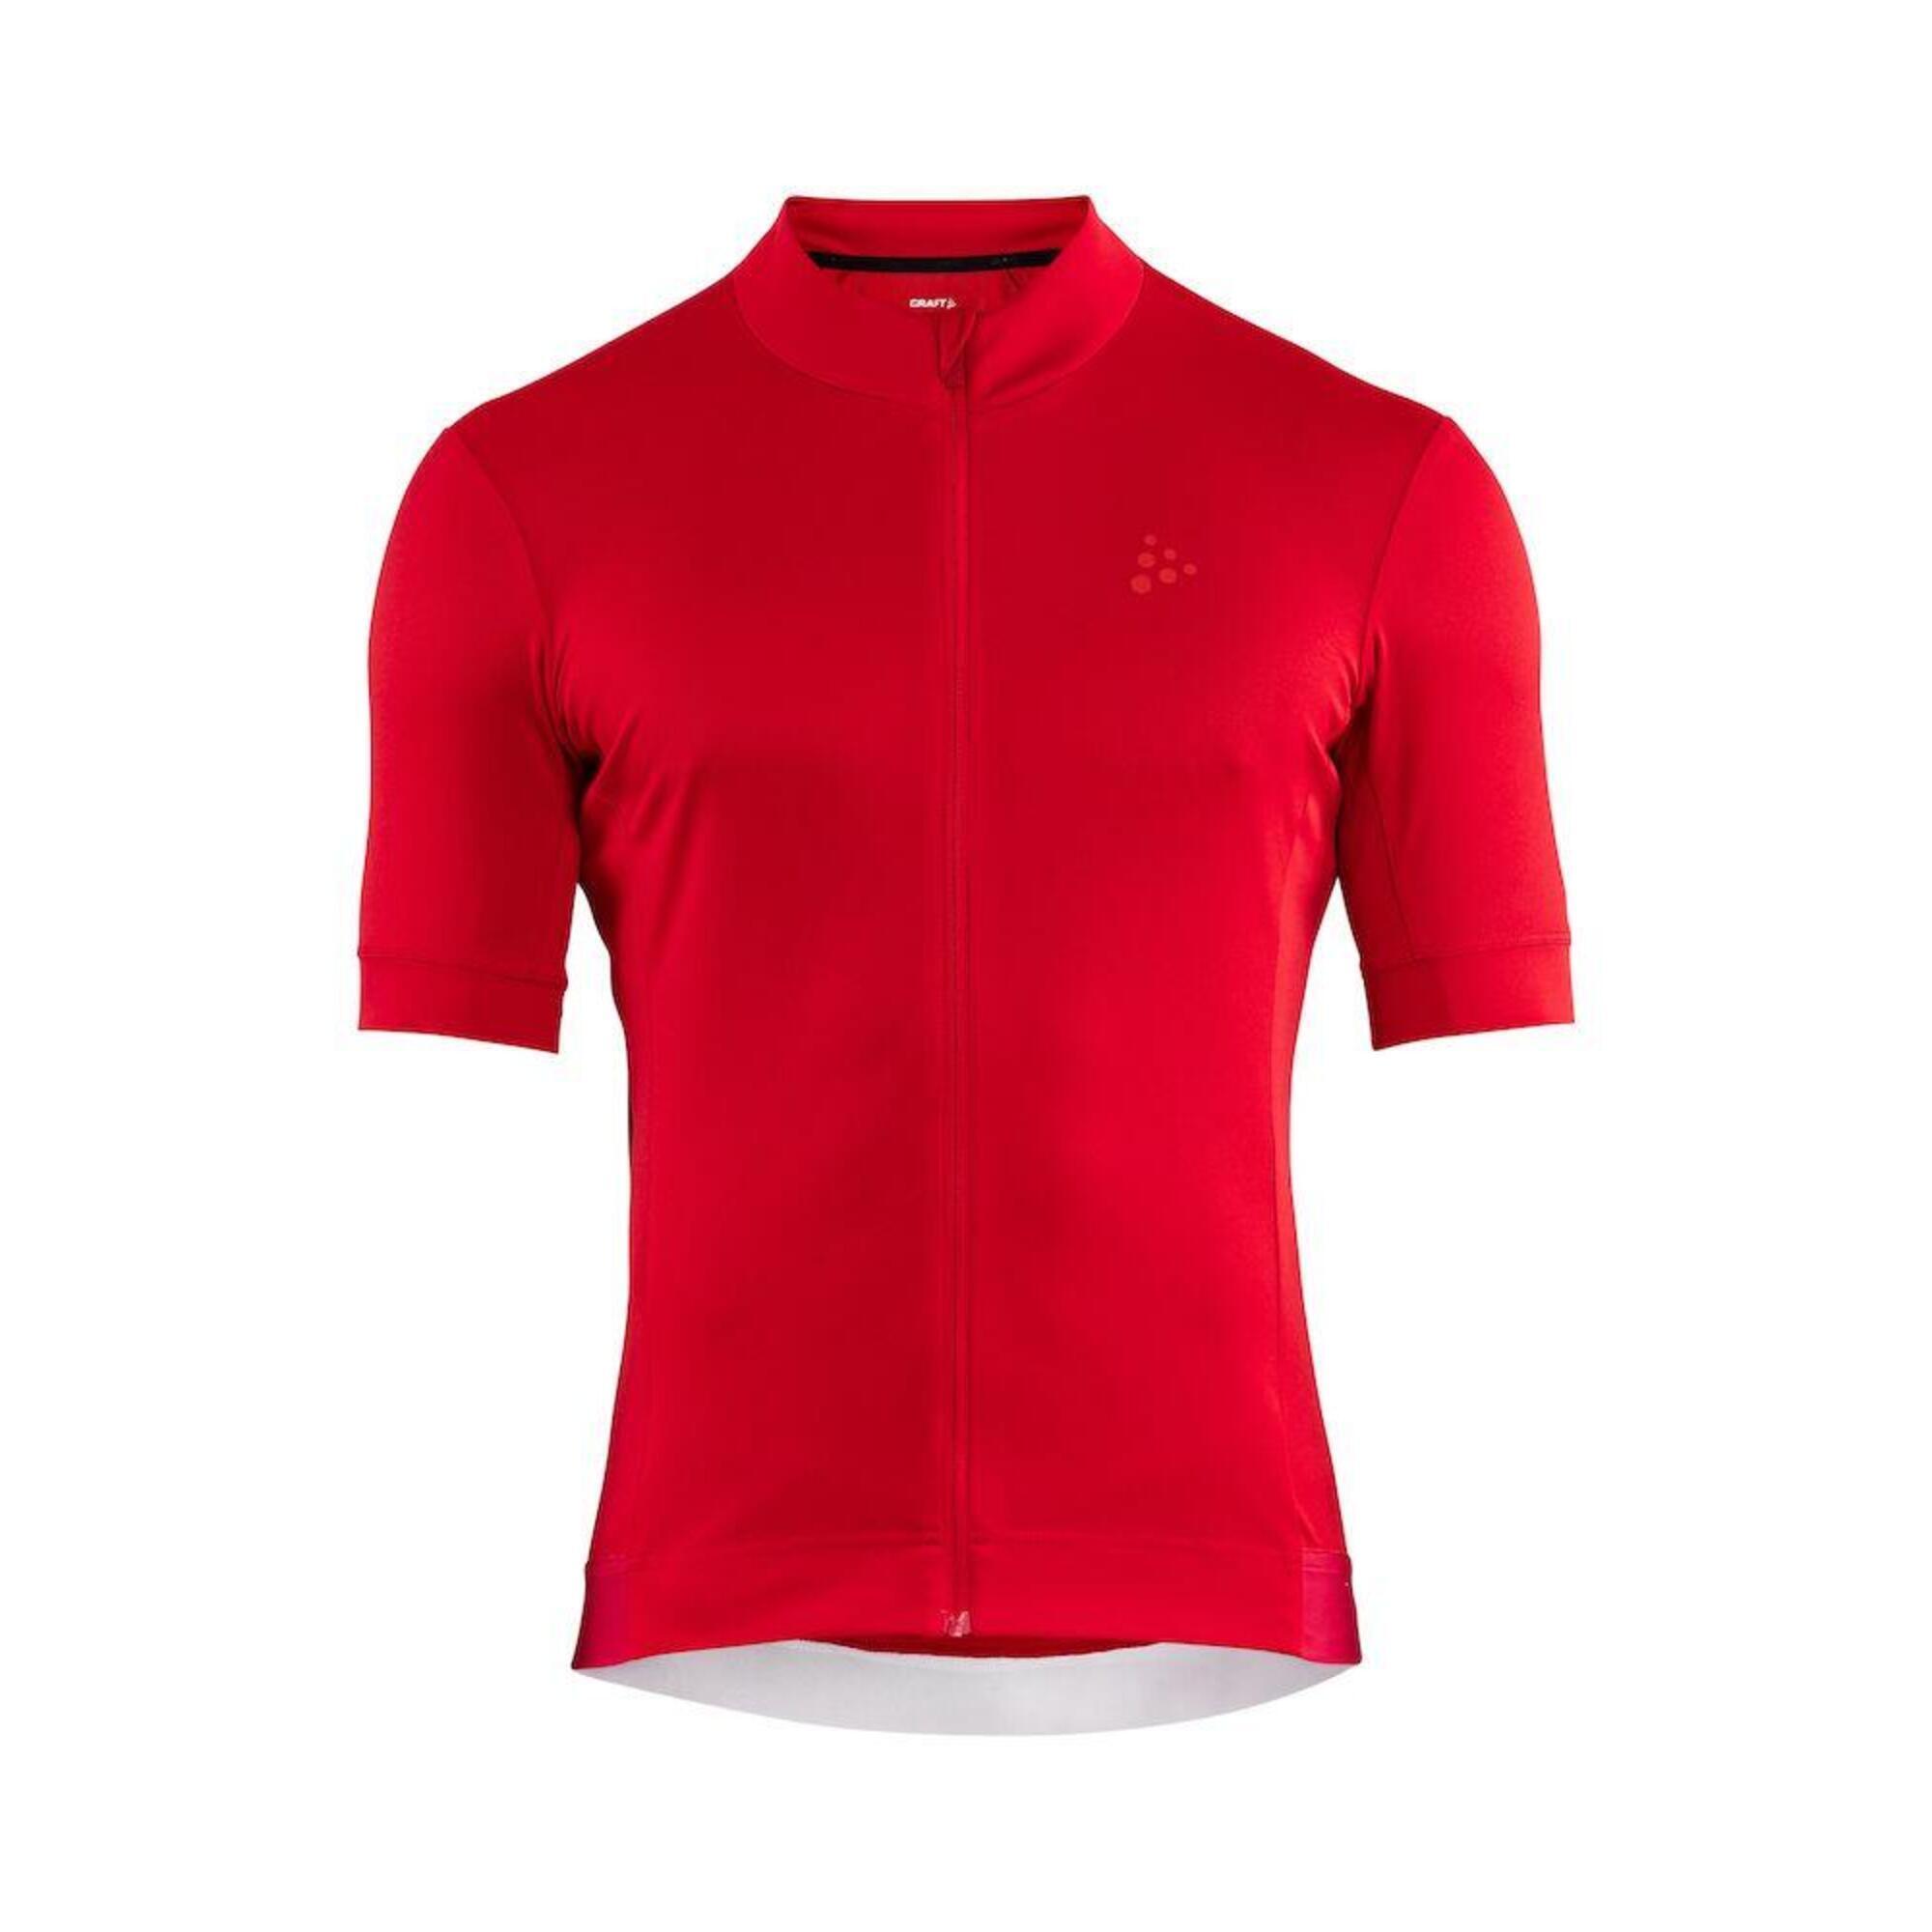 CRAFT Womens Cycle Essence Short Sleeve Jersey Bright Red